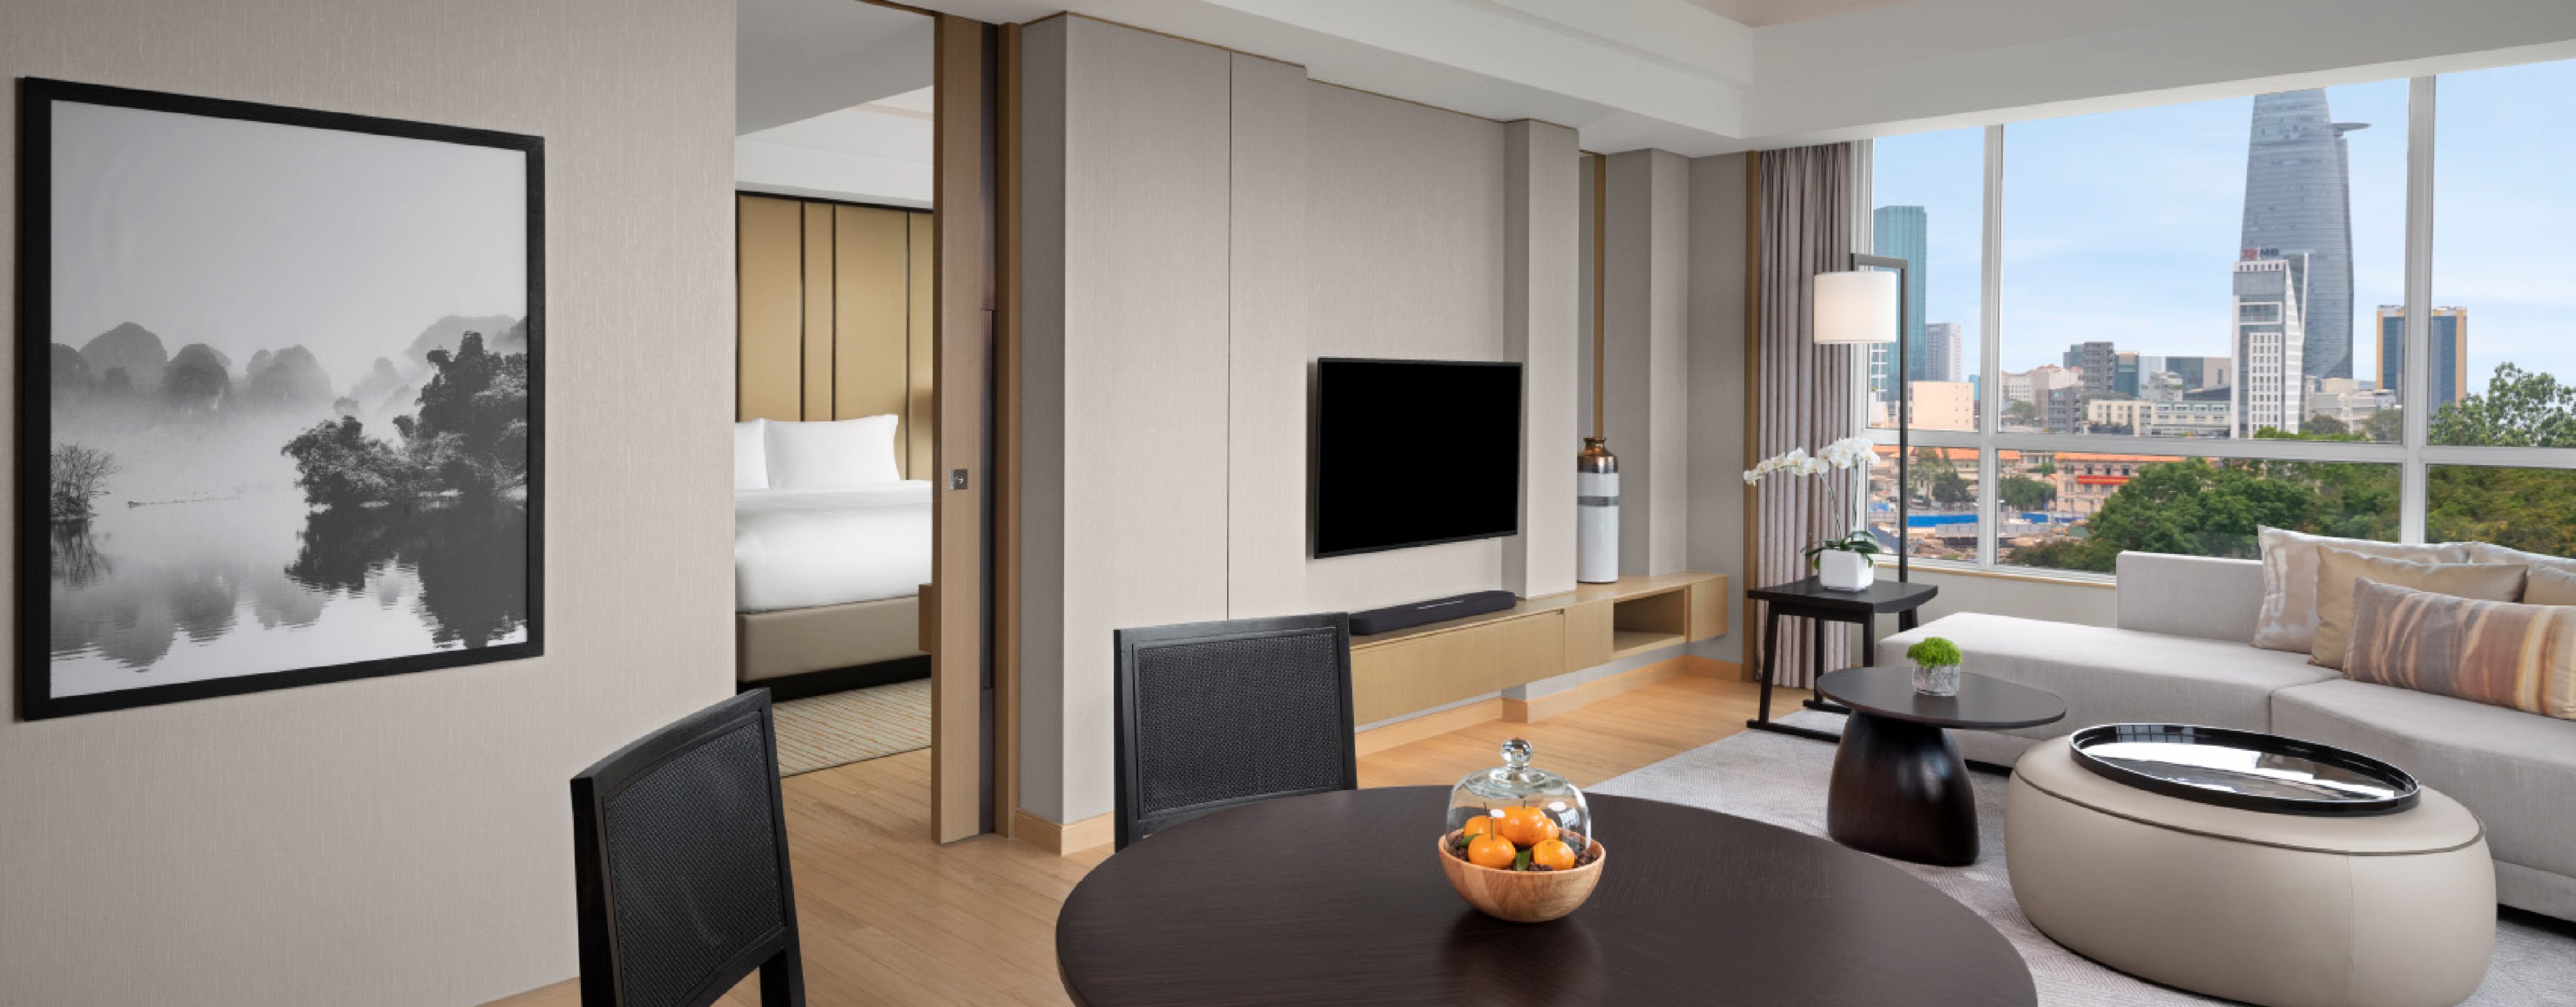 interior of the Executive Suite at a Luxury hotel in Ho Chi Minh City showing an open living room with a dark circular table, a large couch, wall mounted TV and entrance to the bedroom at the New World Saigon Hotel